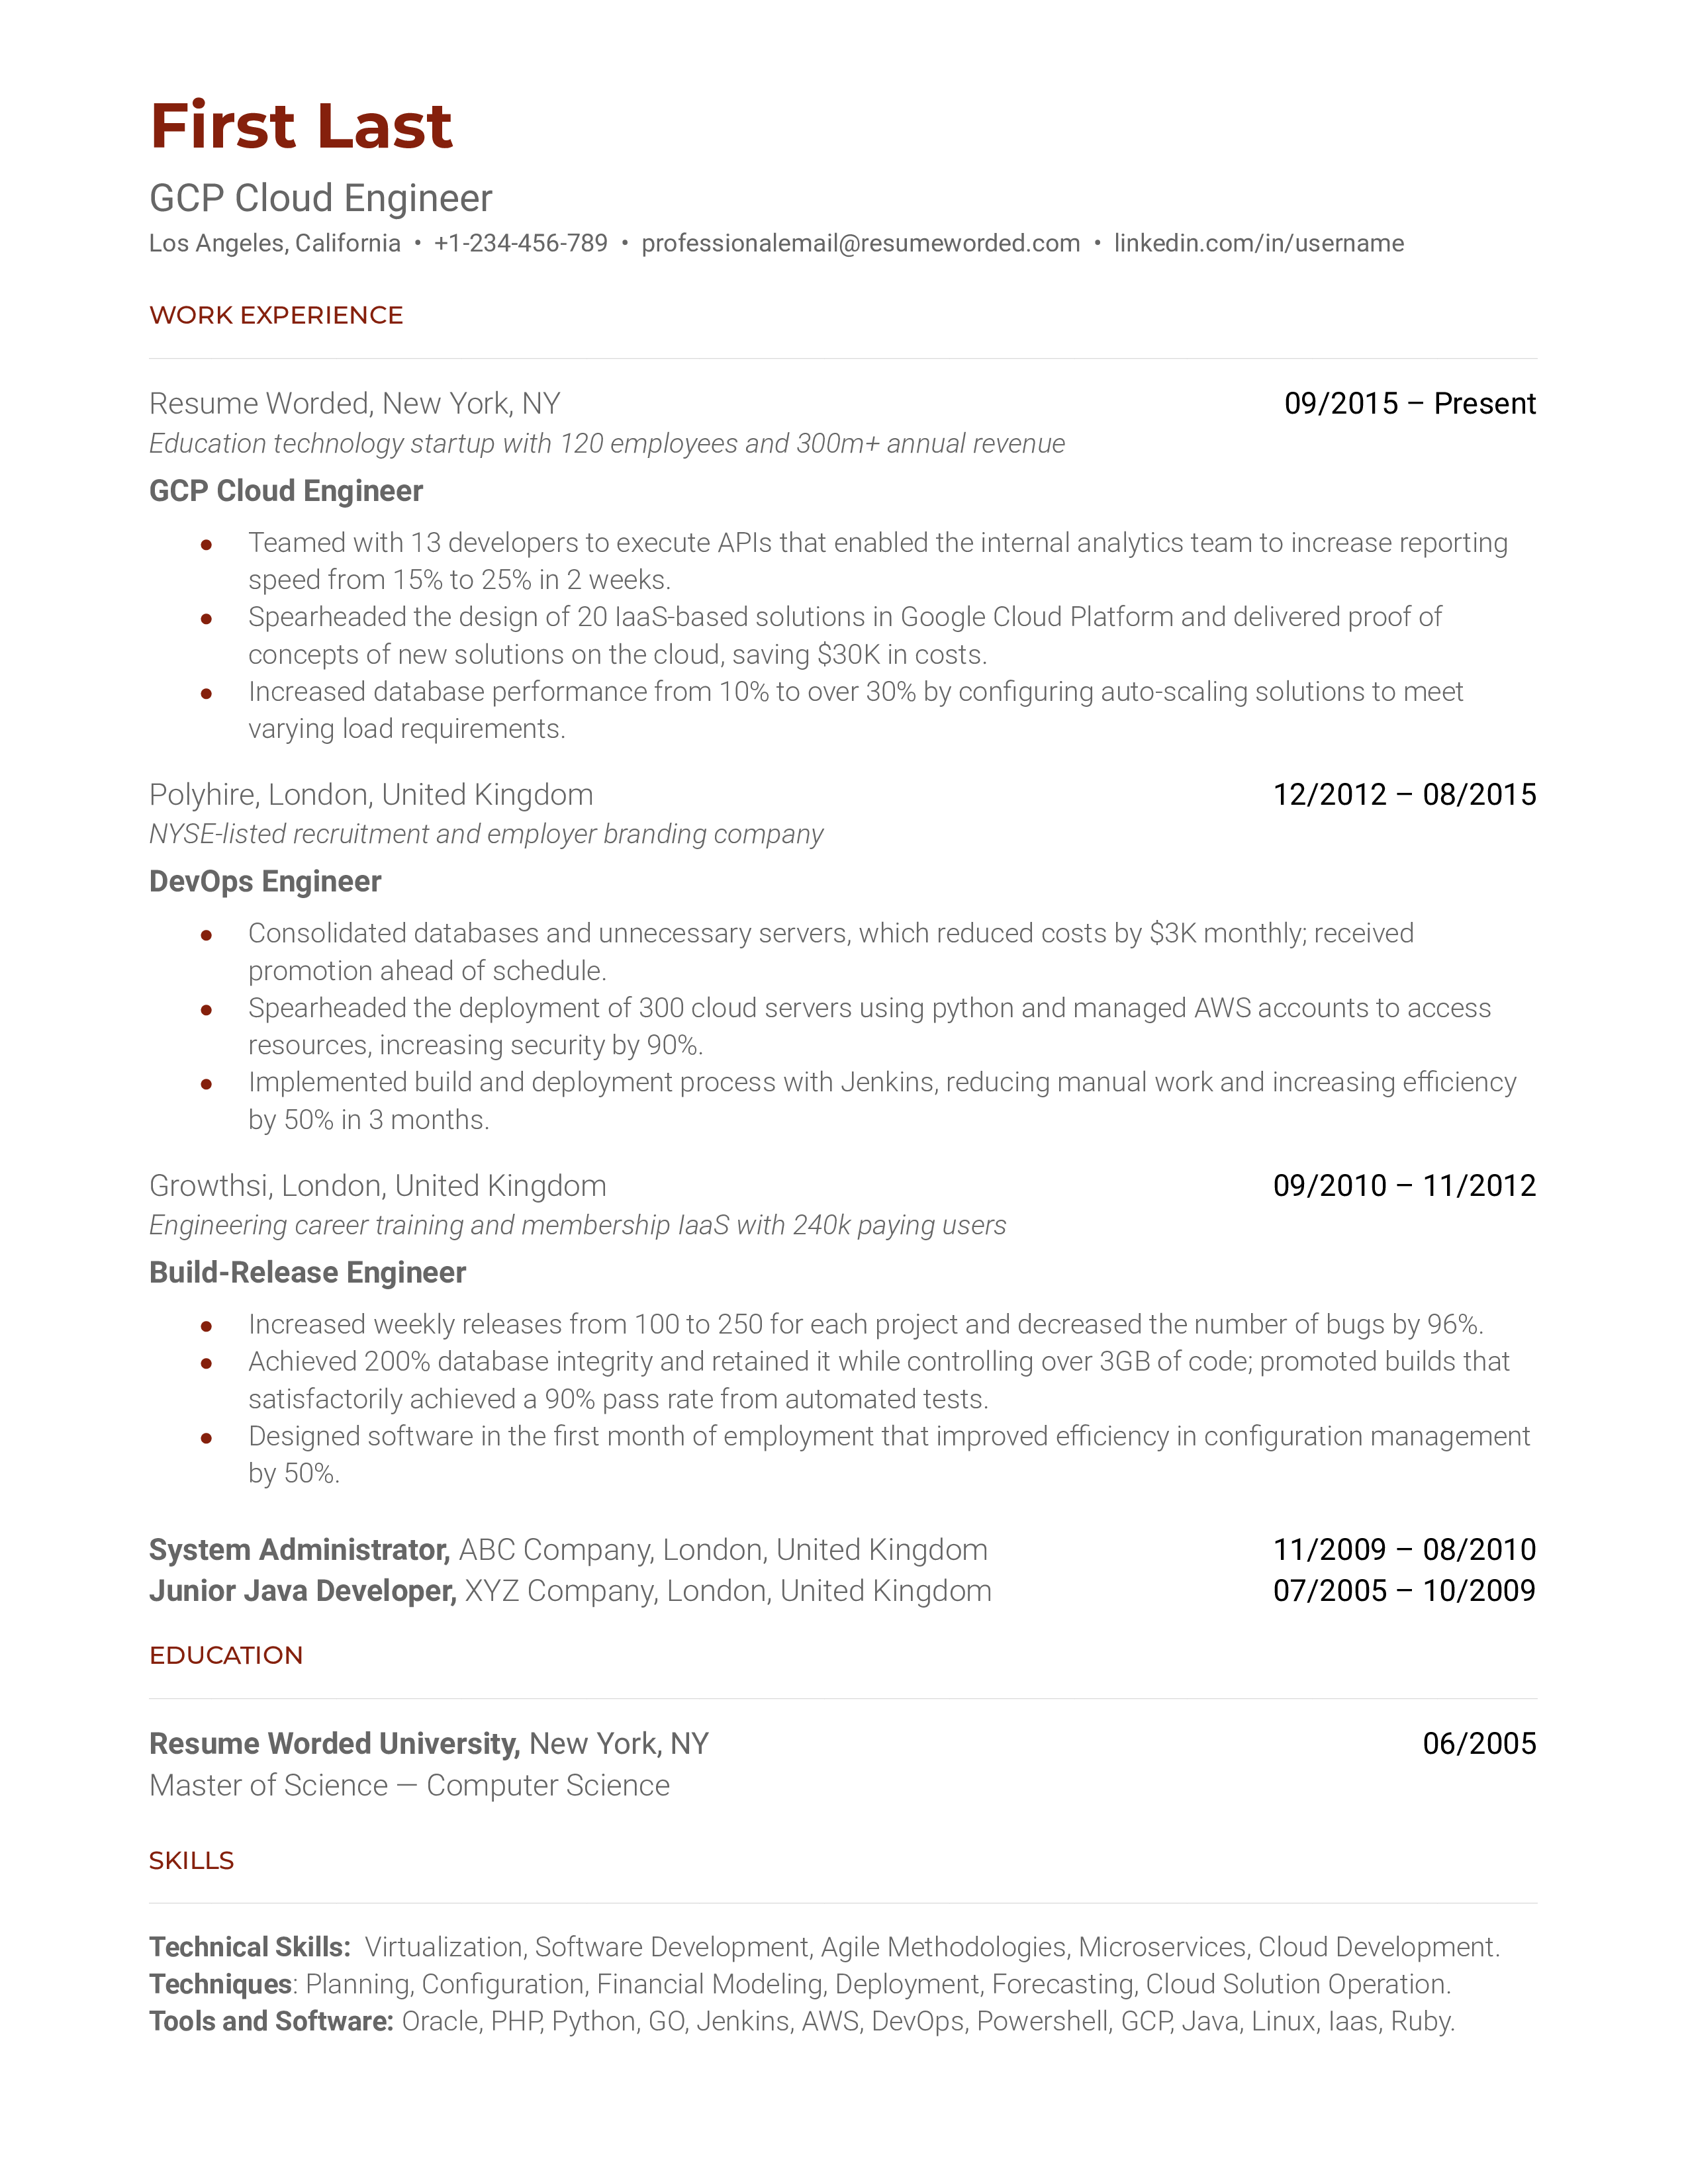 A GCP cloud engineer resume sample that highlights the candidate's GCP qualifications and experience.